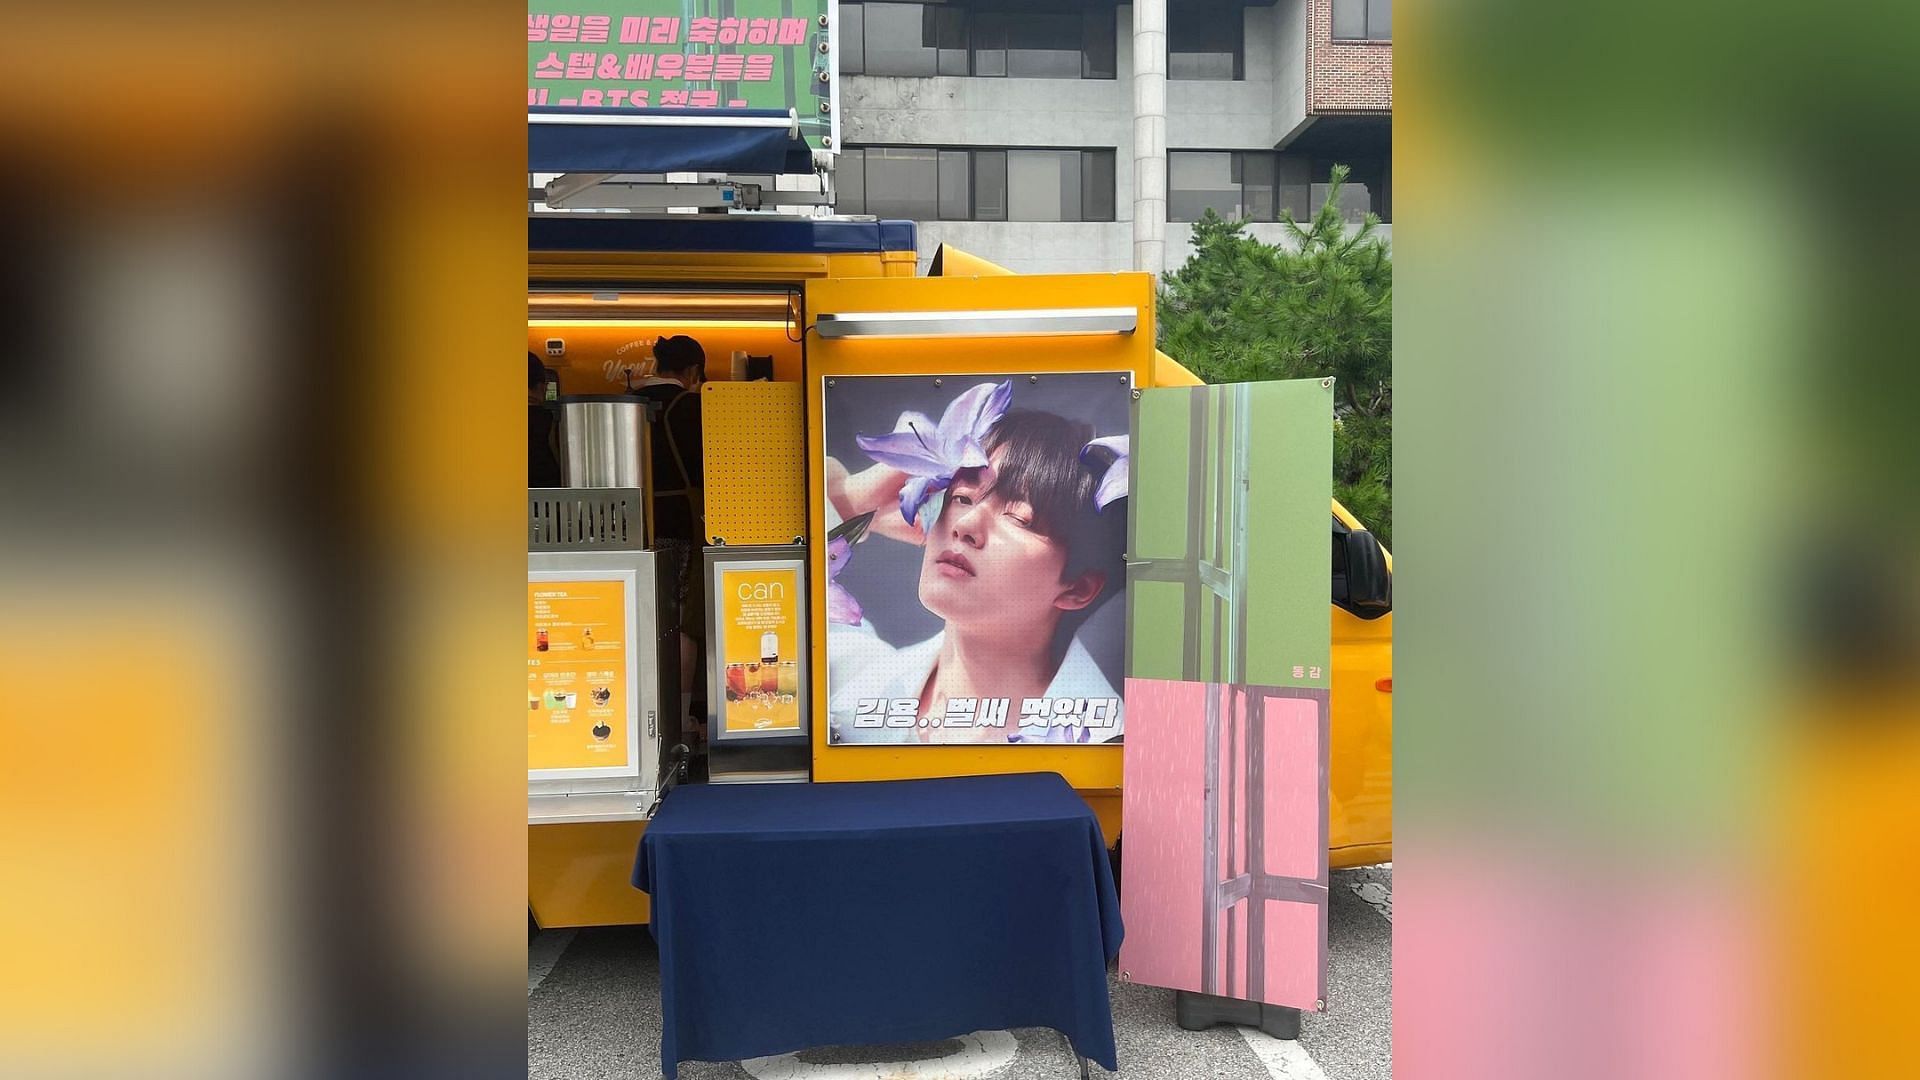 Right banner of the coffee truck (Image via Instagram/yeojin9oo)